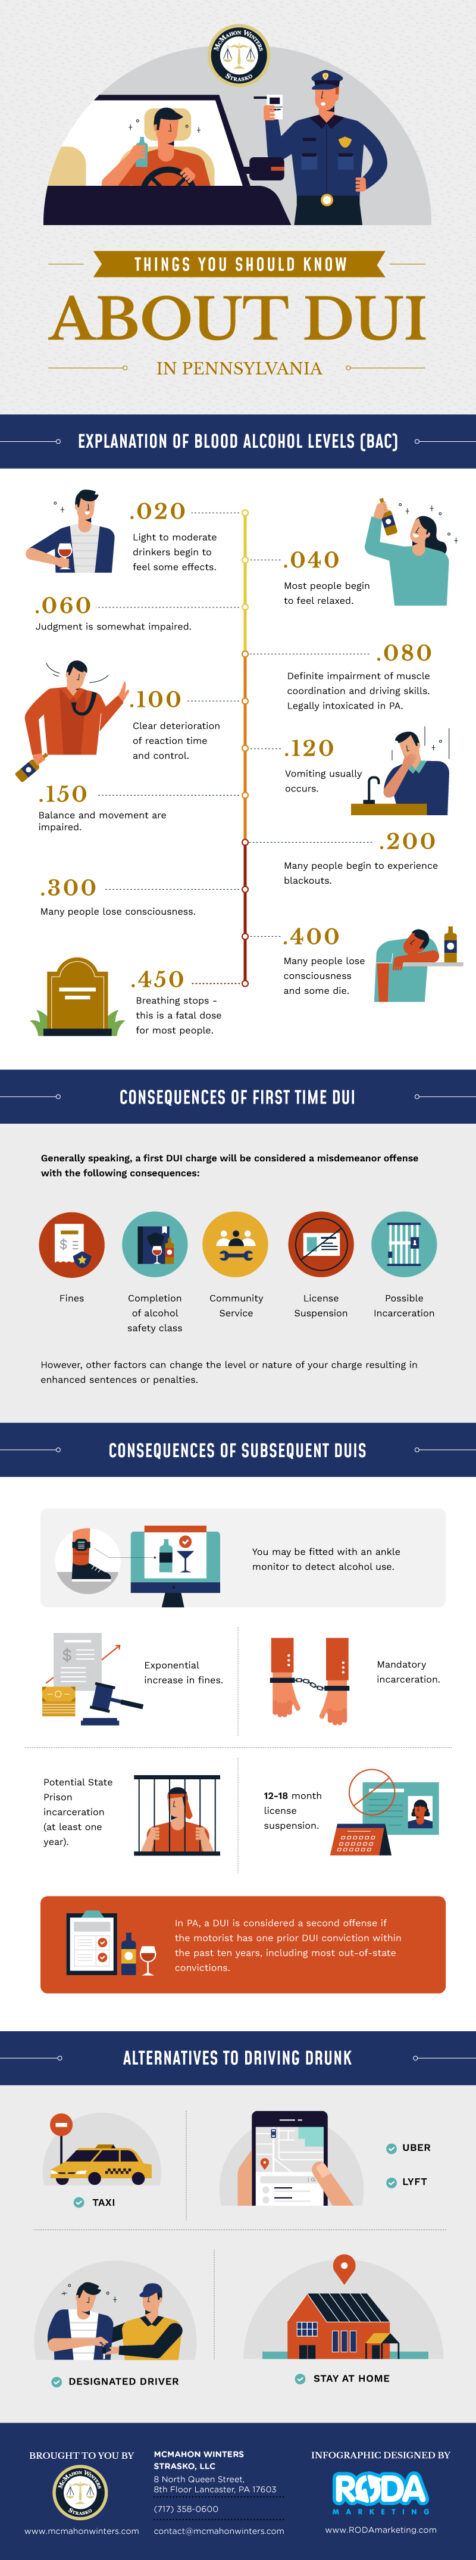 dui infographic